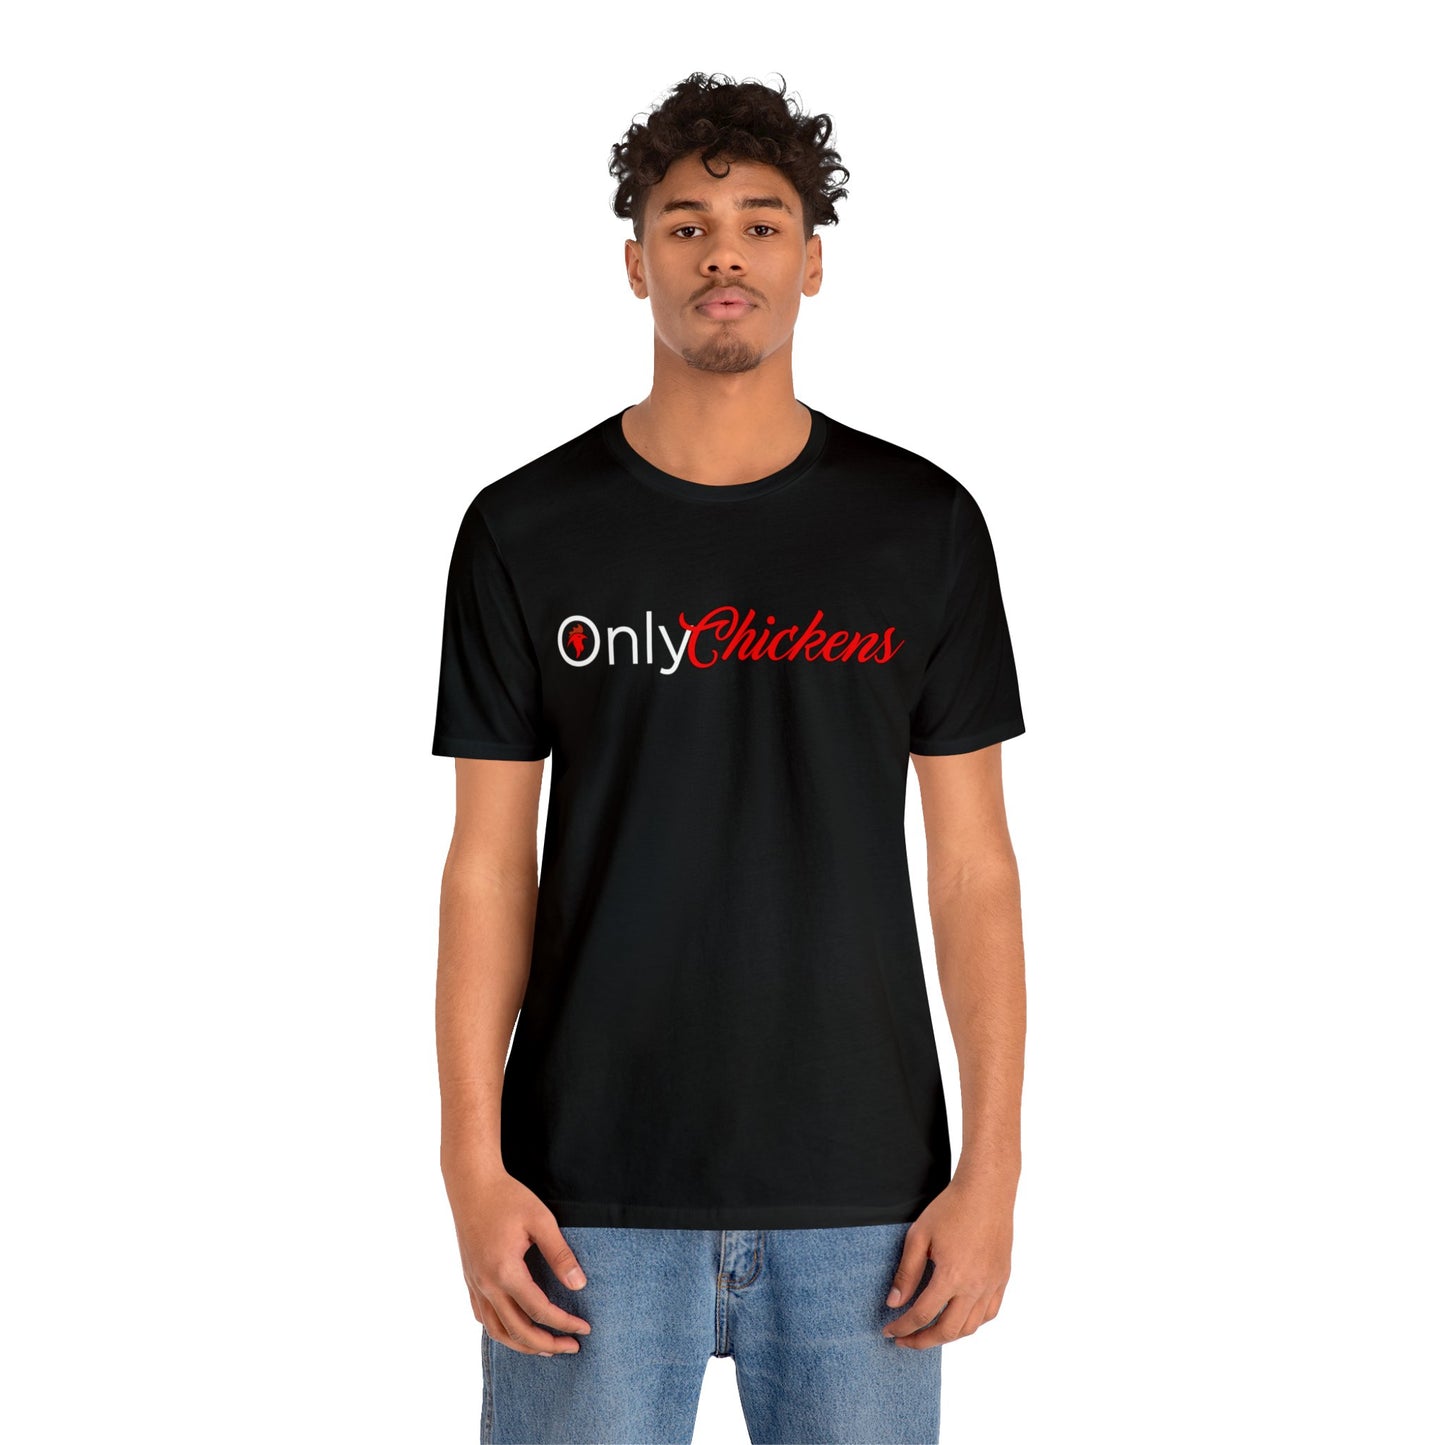 OnlyChickens Tee